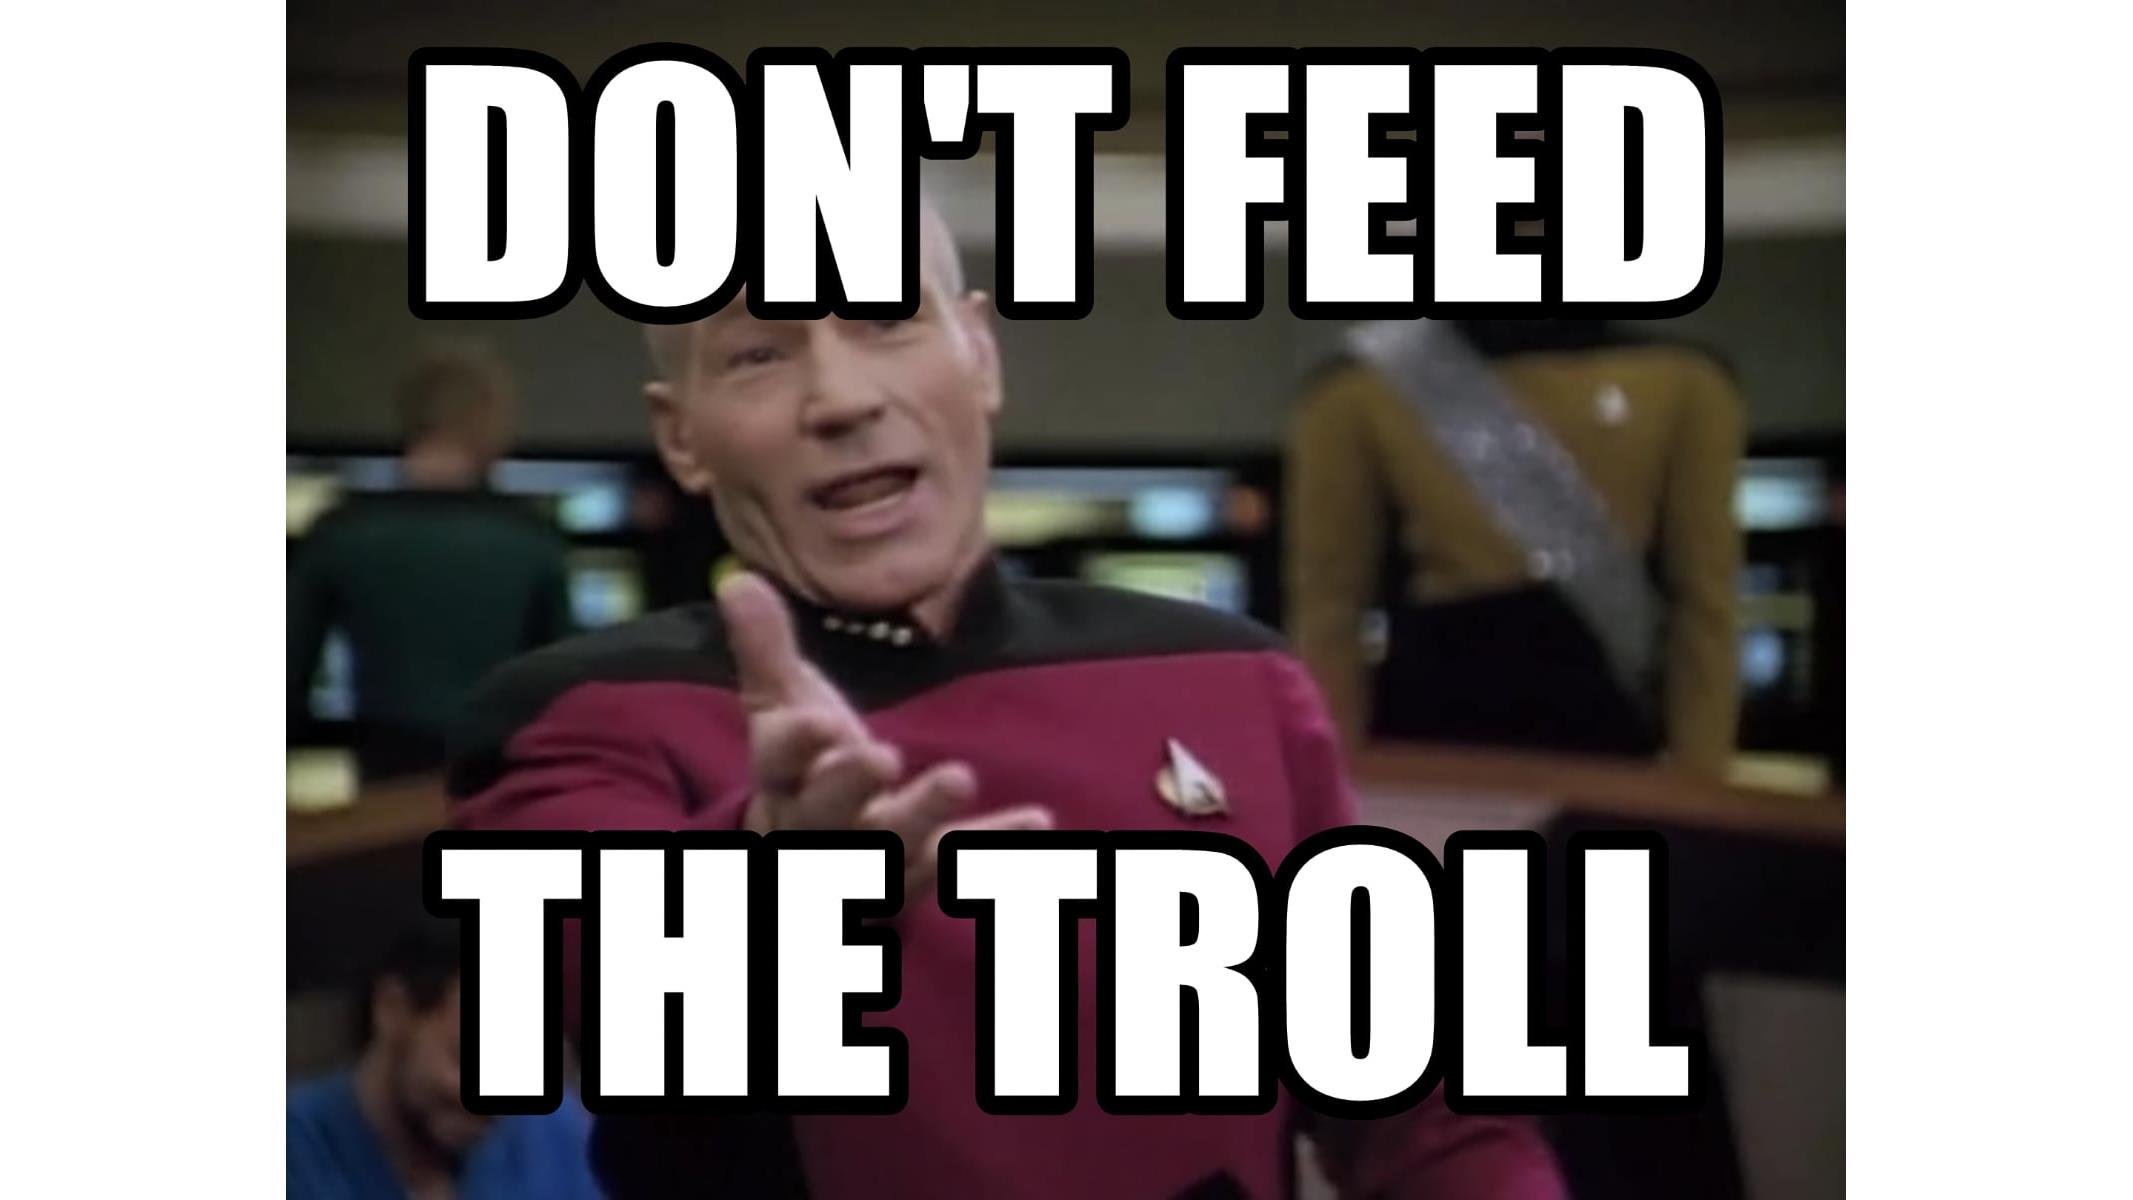 The conventional wisdom about not feeding trolls makes online